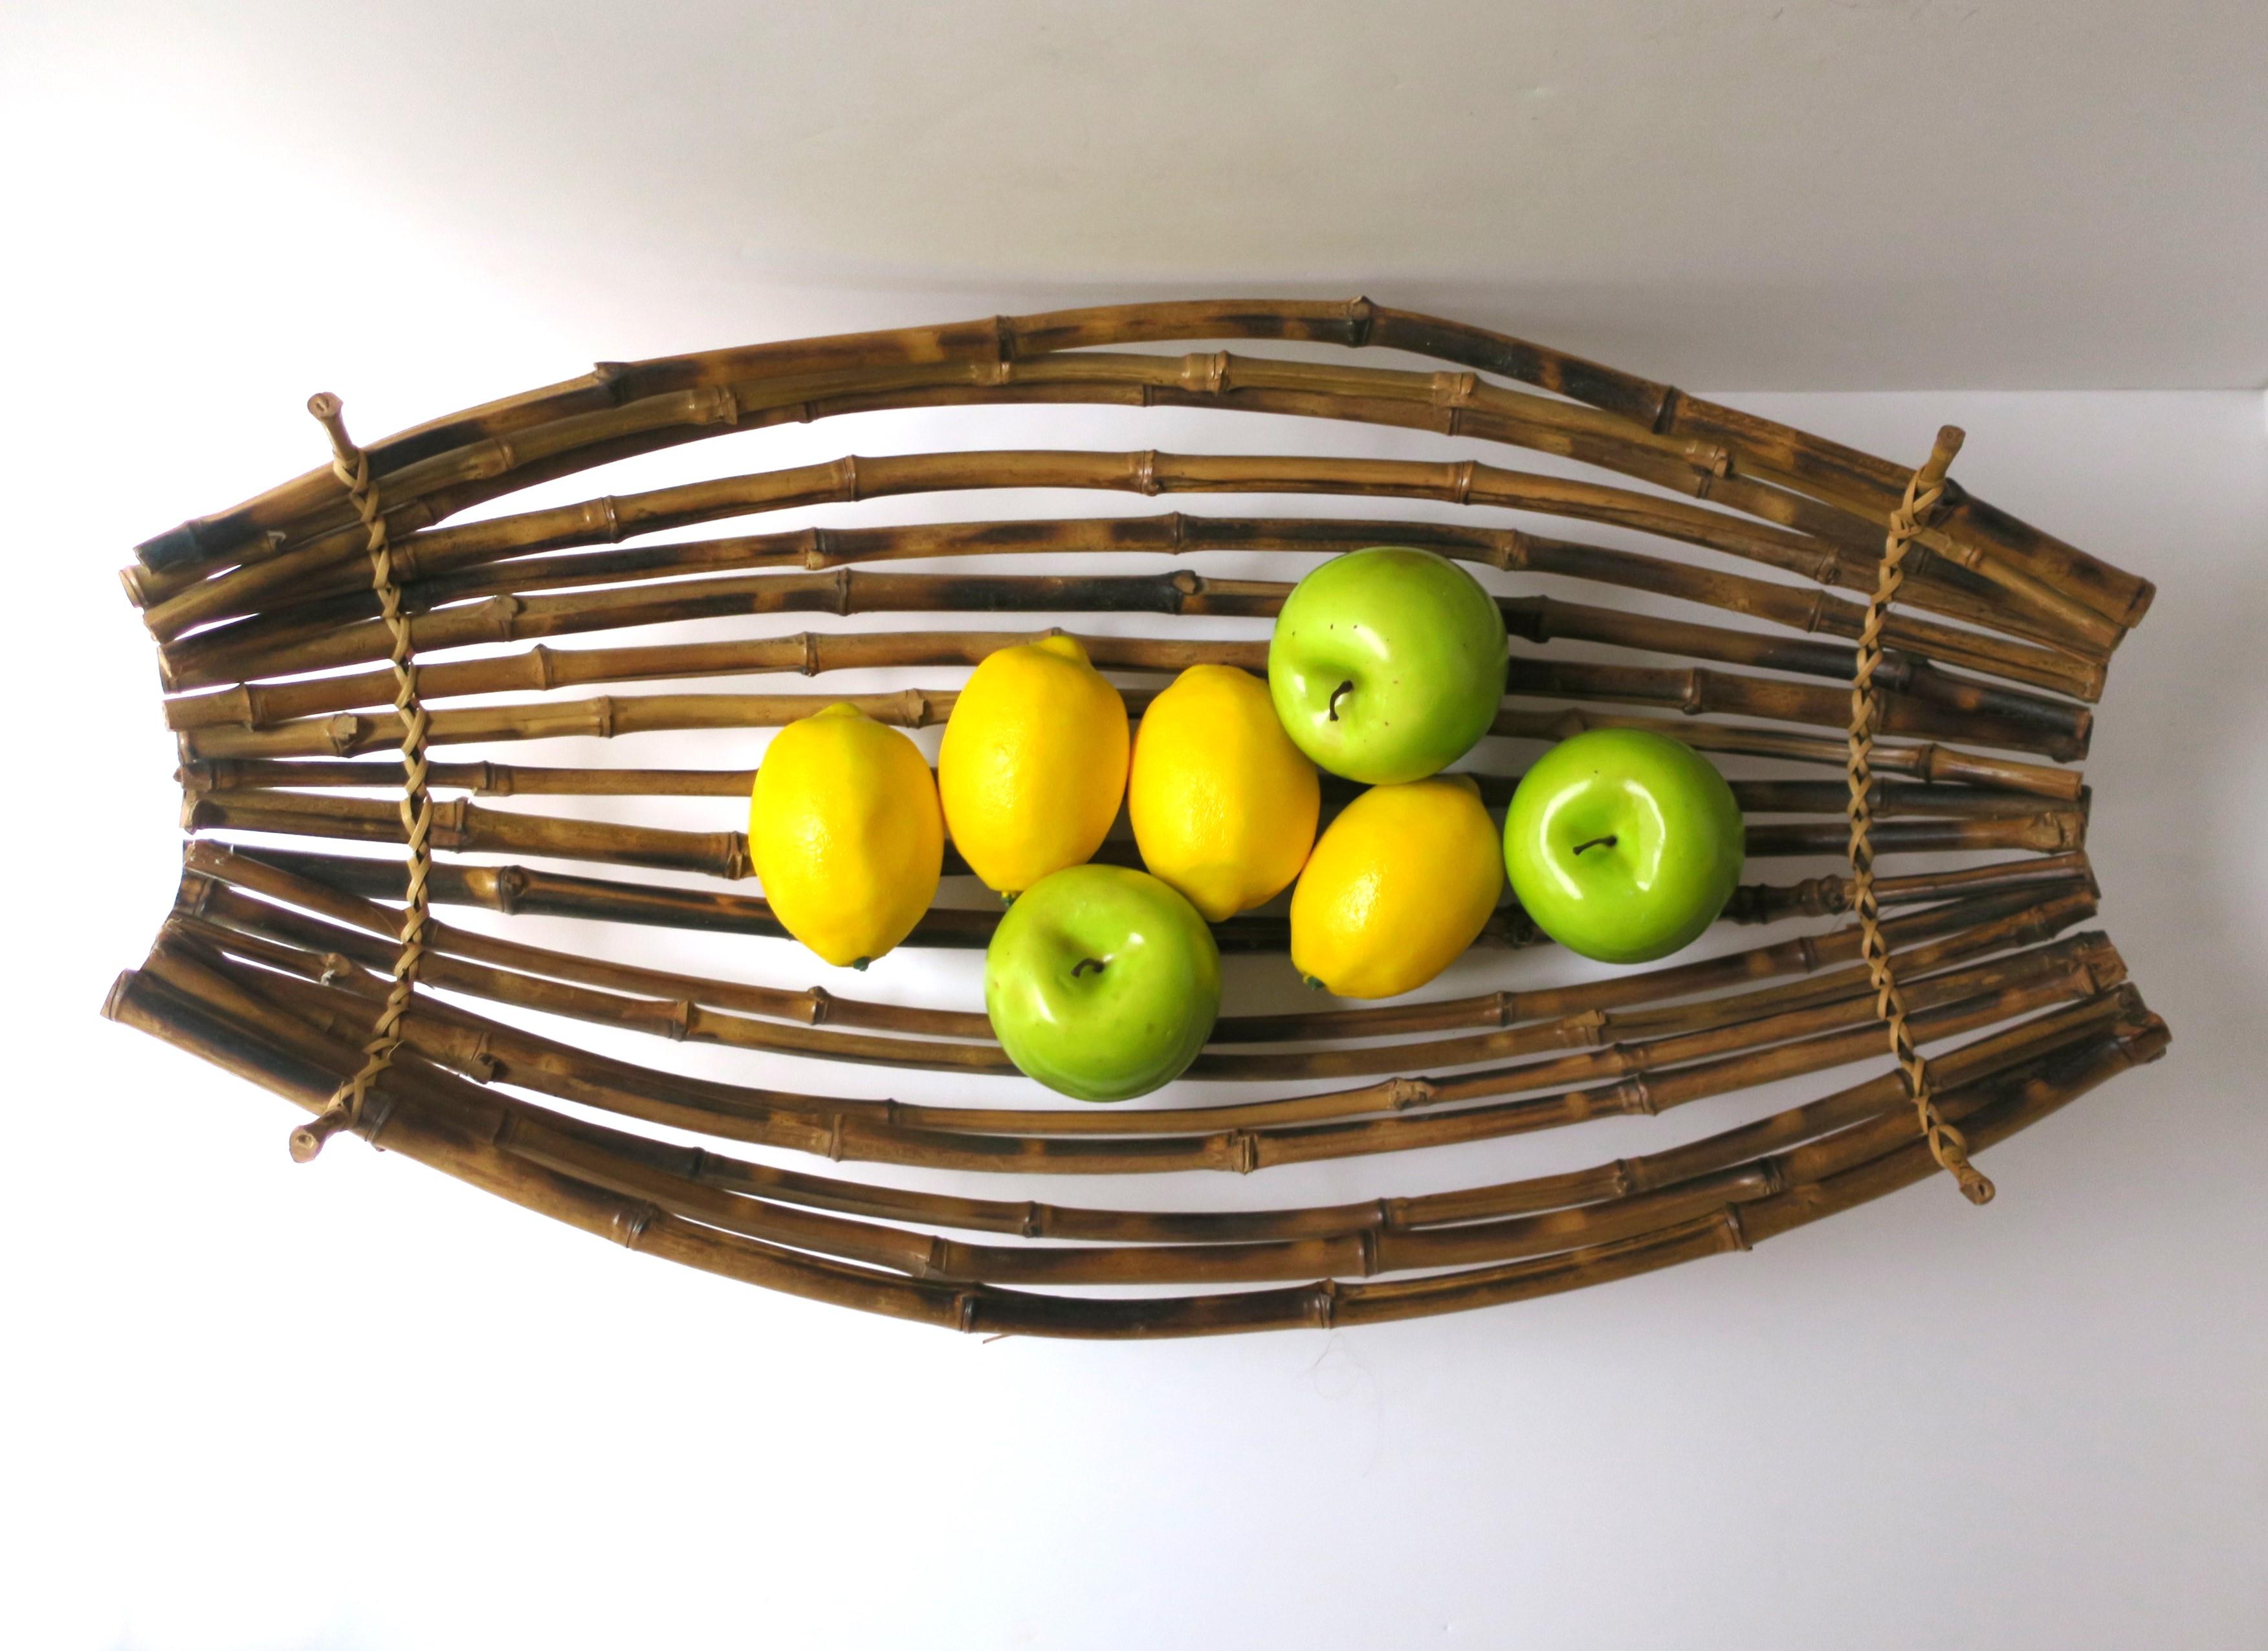 A wicker bamboo oblong centerpiece basket, circa late-20th century. Basket is all bamboo with wicker wrapped ends. Piece can hold fruit (demonstrated), vegetables, bread, etc. Great a centerpiece basket on a dining table, credenza, etc., indoors or